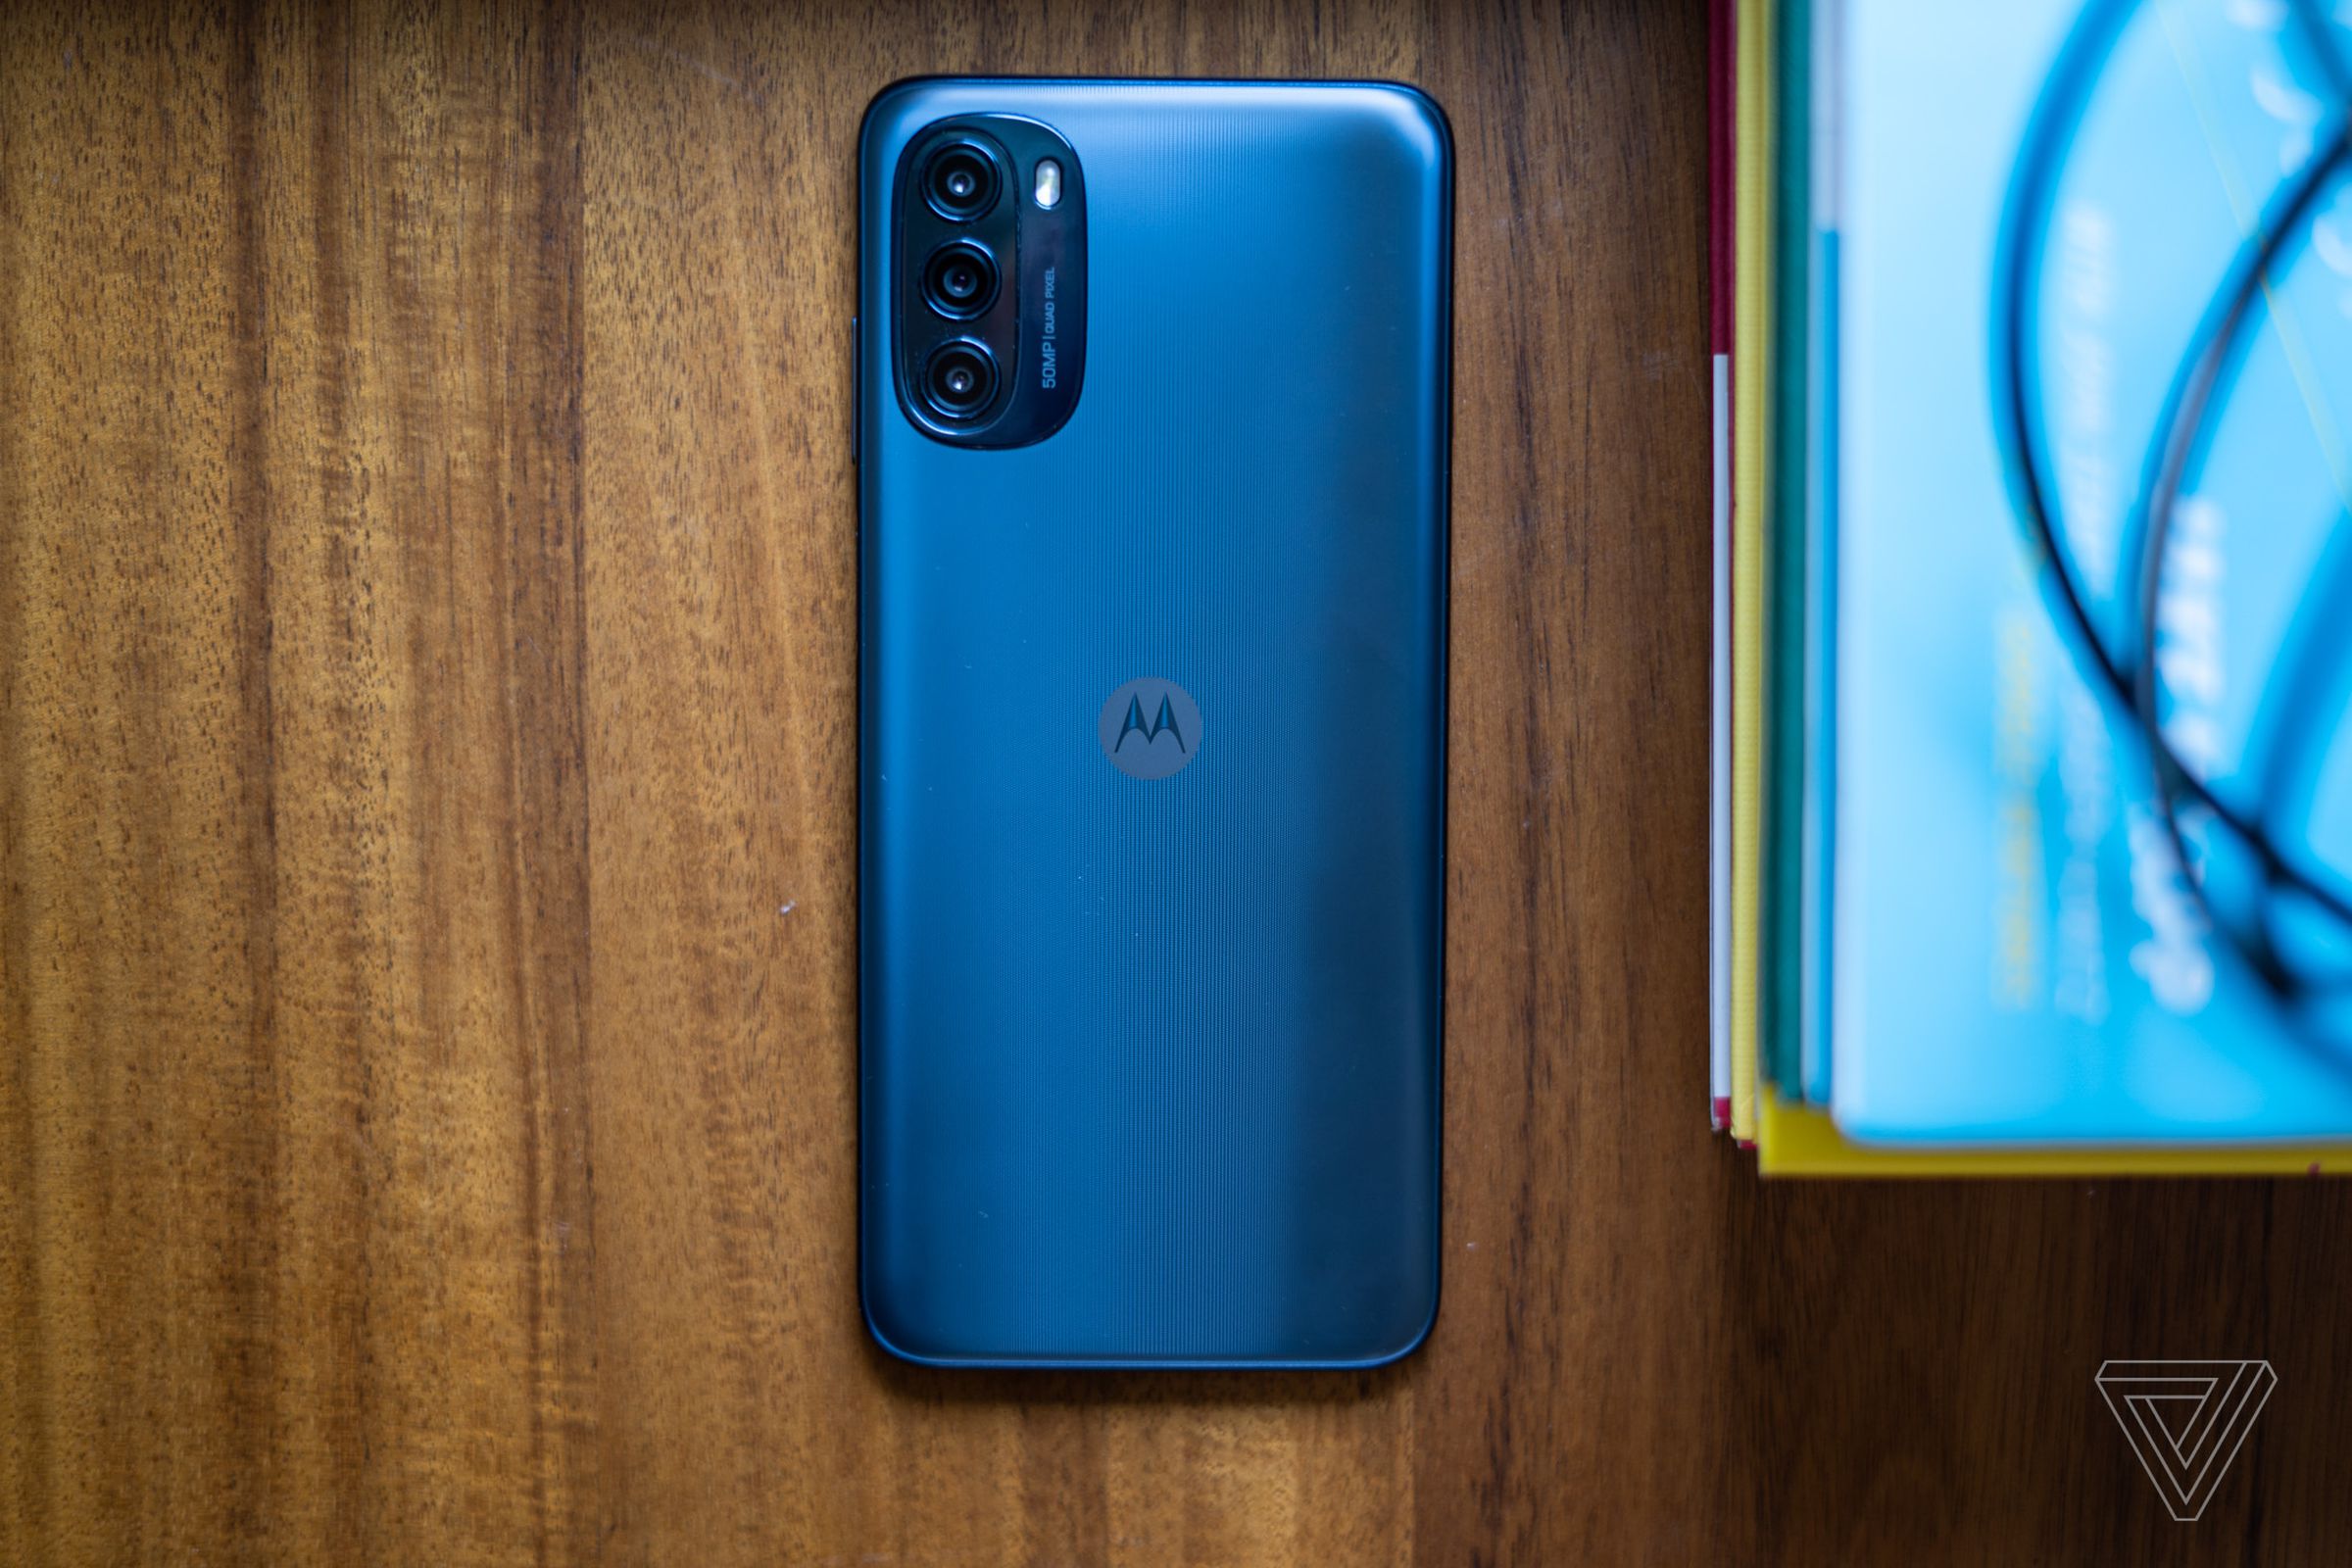 There’s a 50-megapixel standard wide plus a depth sensor and a low-res macro camera on the Moto G 5G.